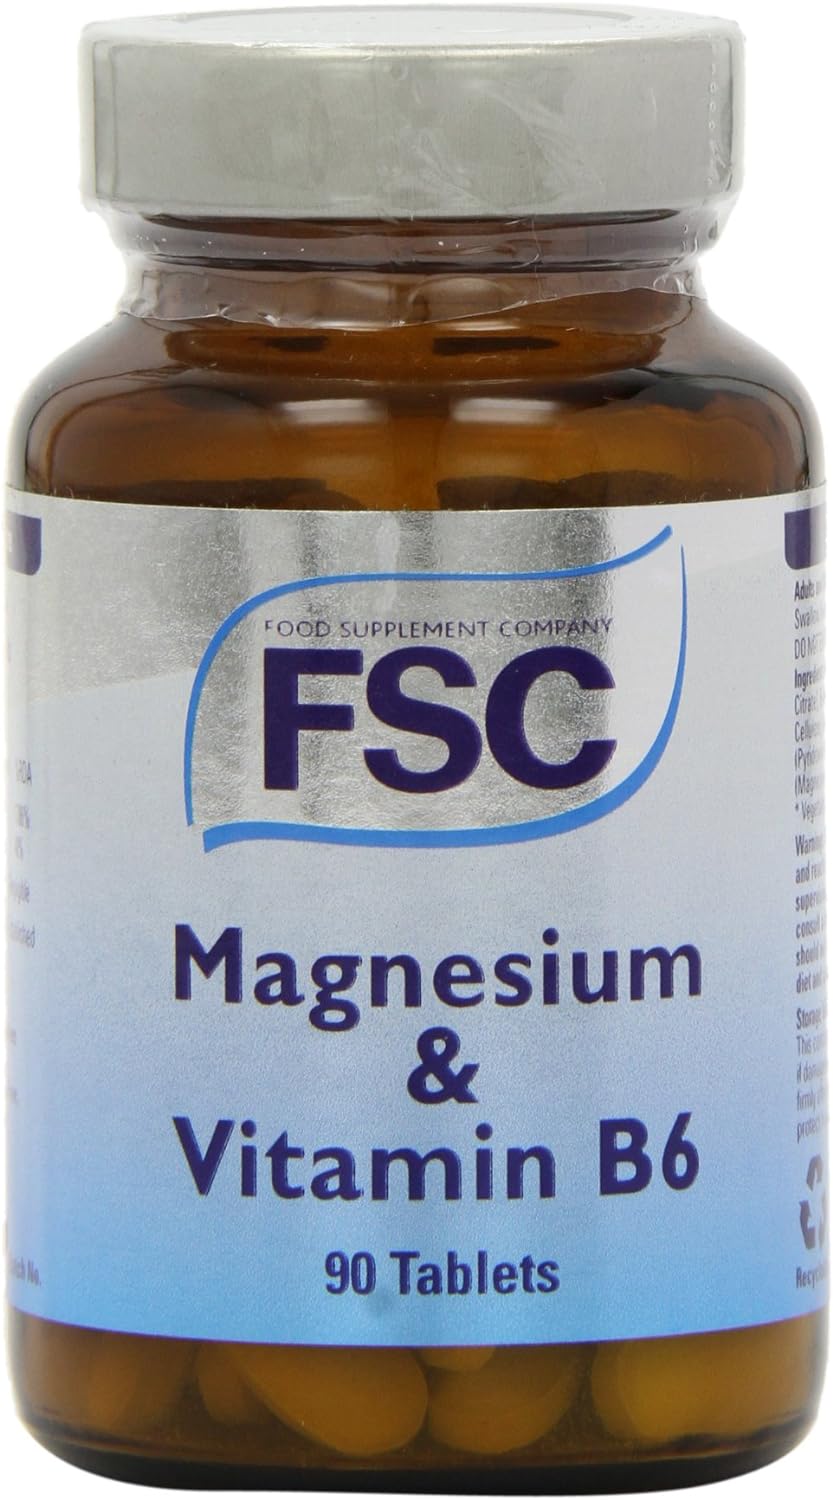 FSC Magnesium and Vitamin B6 - Pack of 90 Tablets

100 Grams